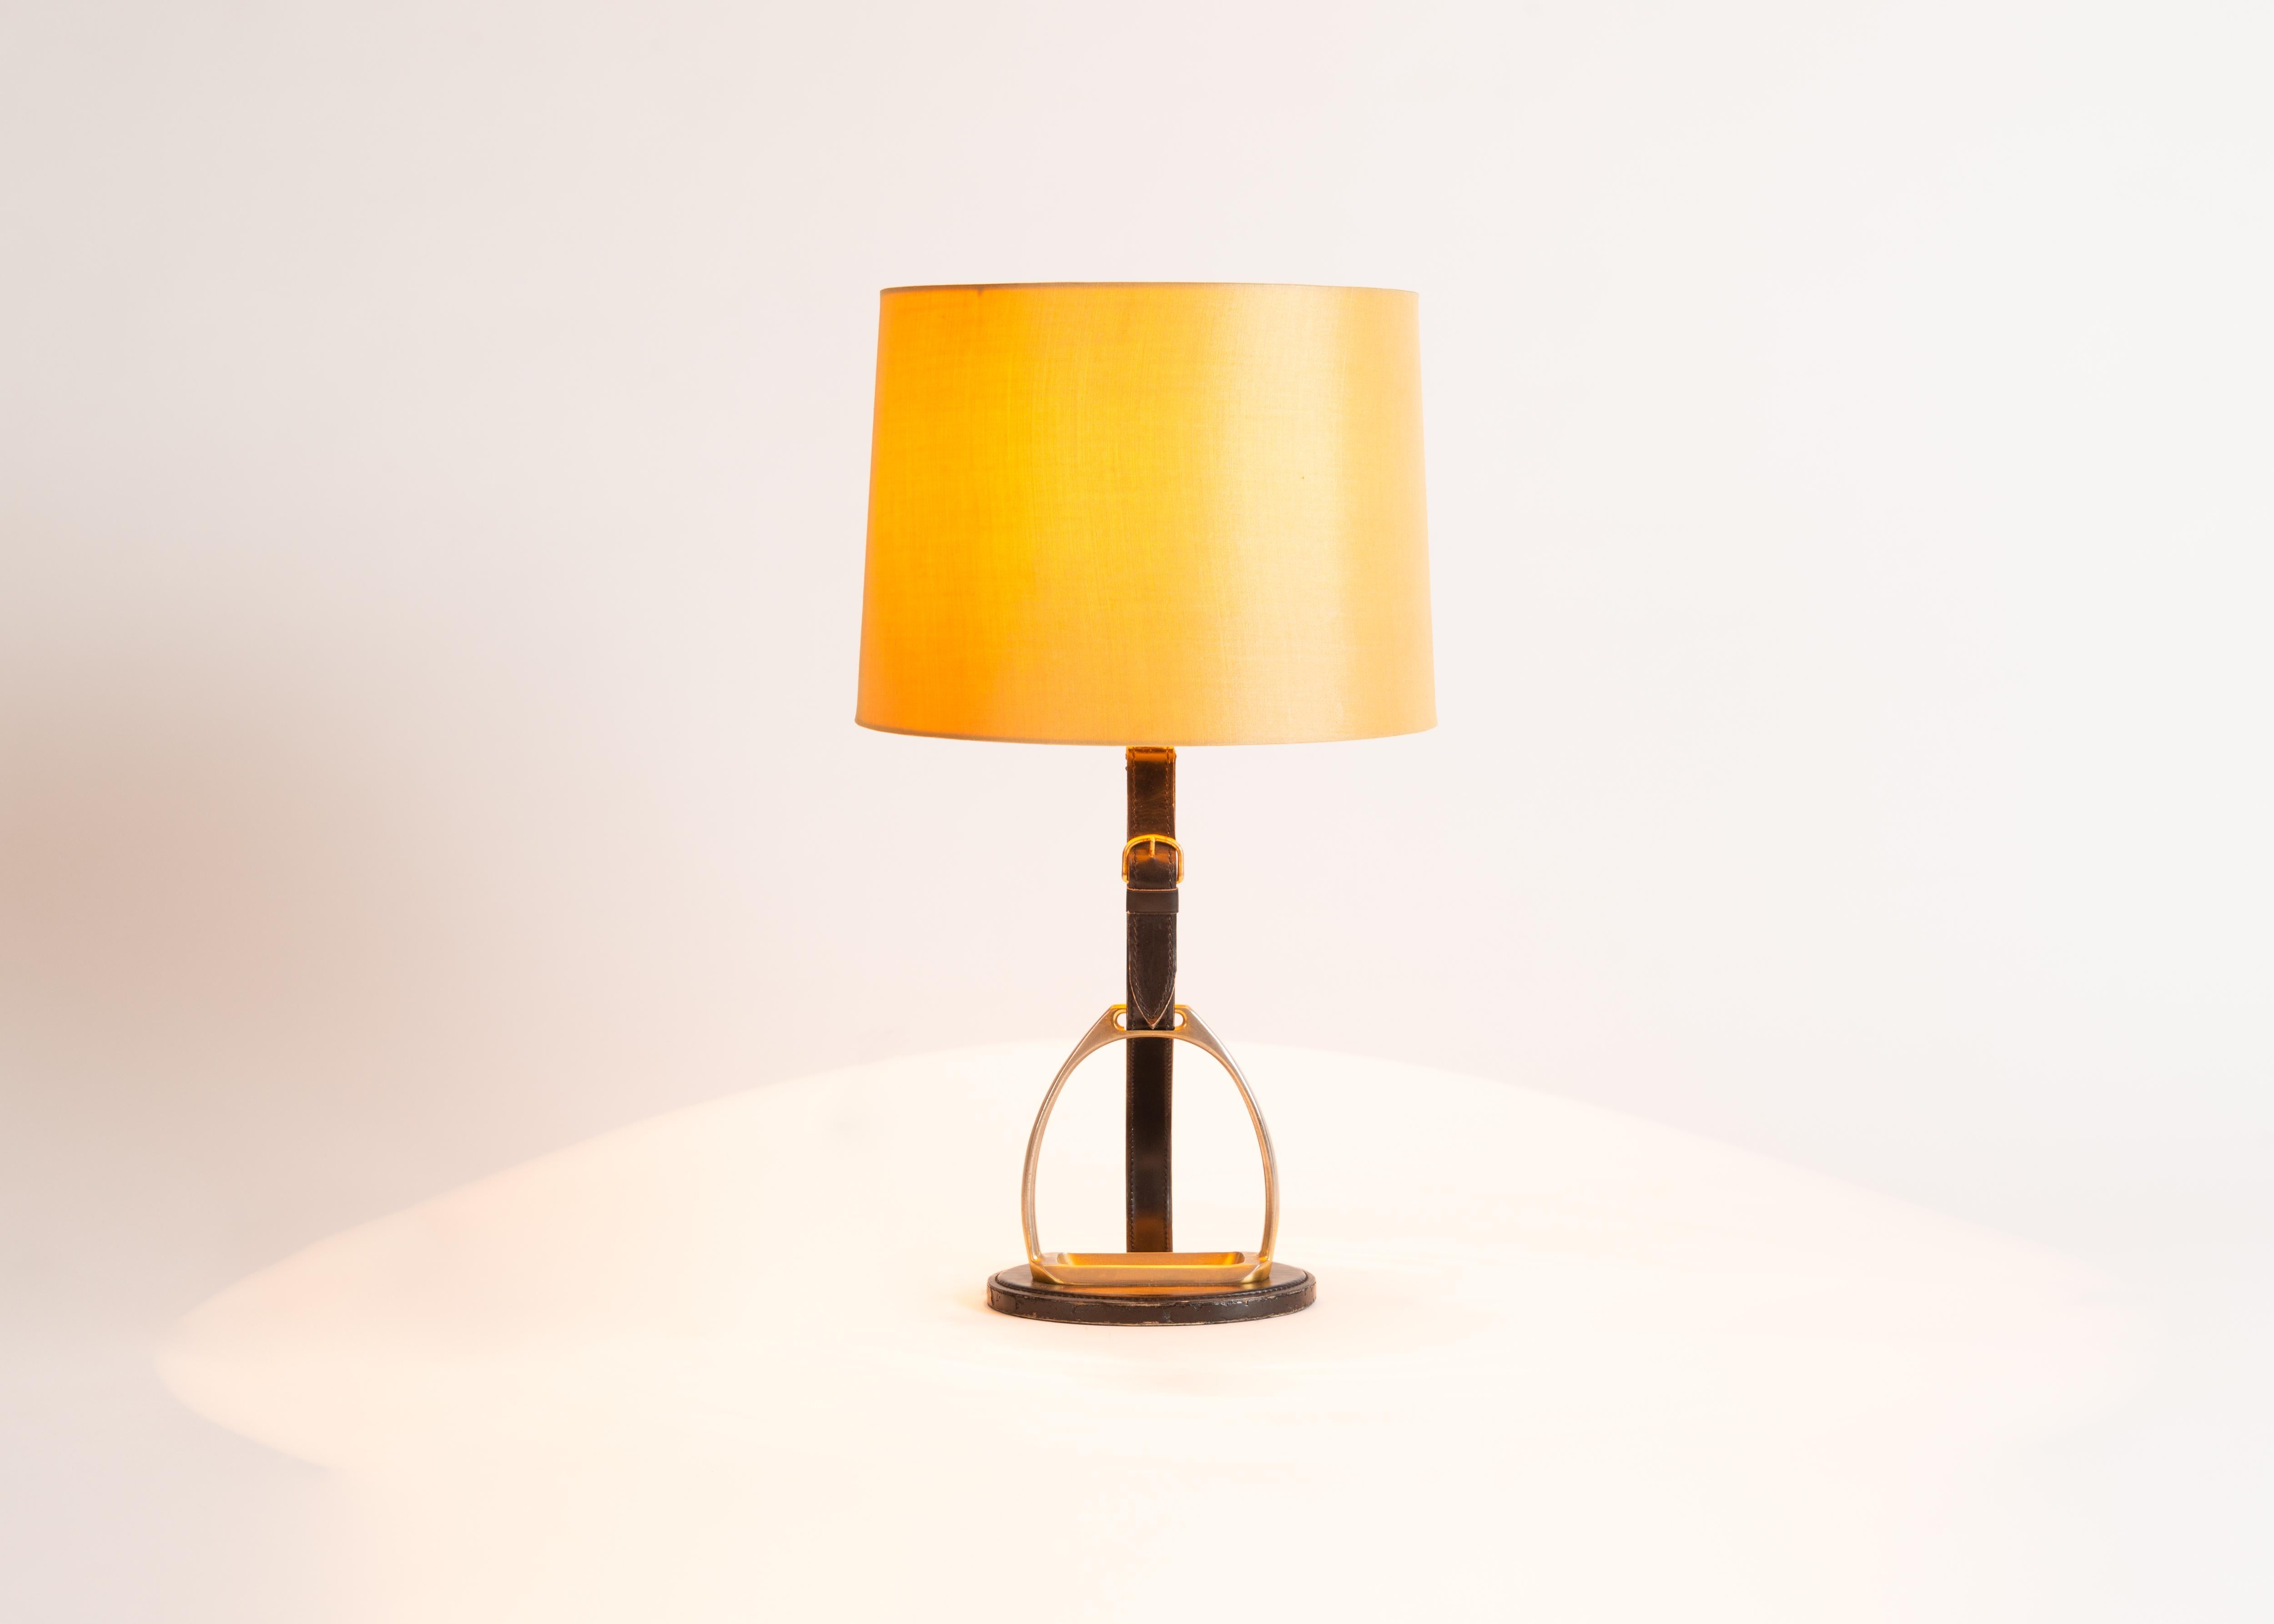 Table lamp with stirrup motif by Longchamp.
Marked on the underside: Longchamp France.